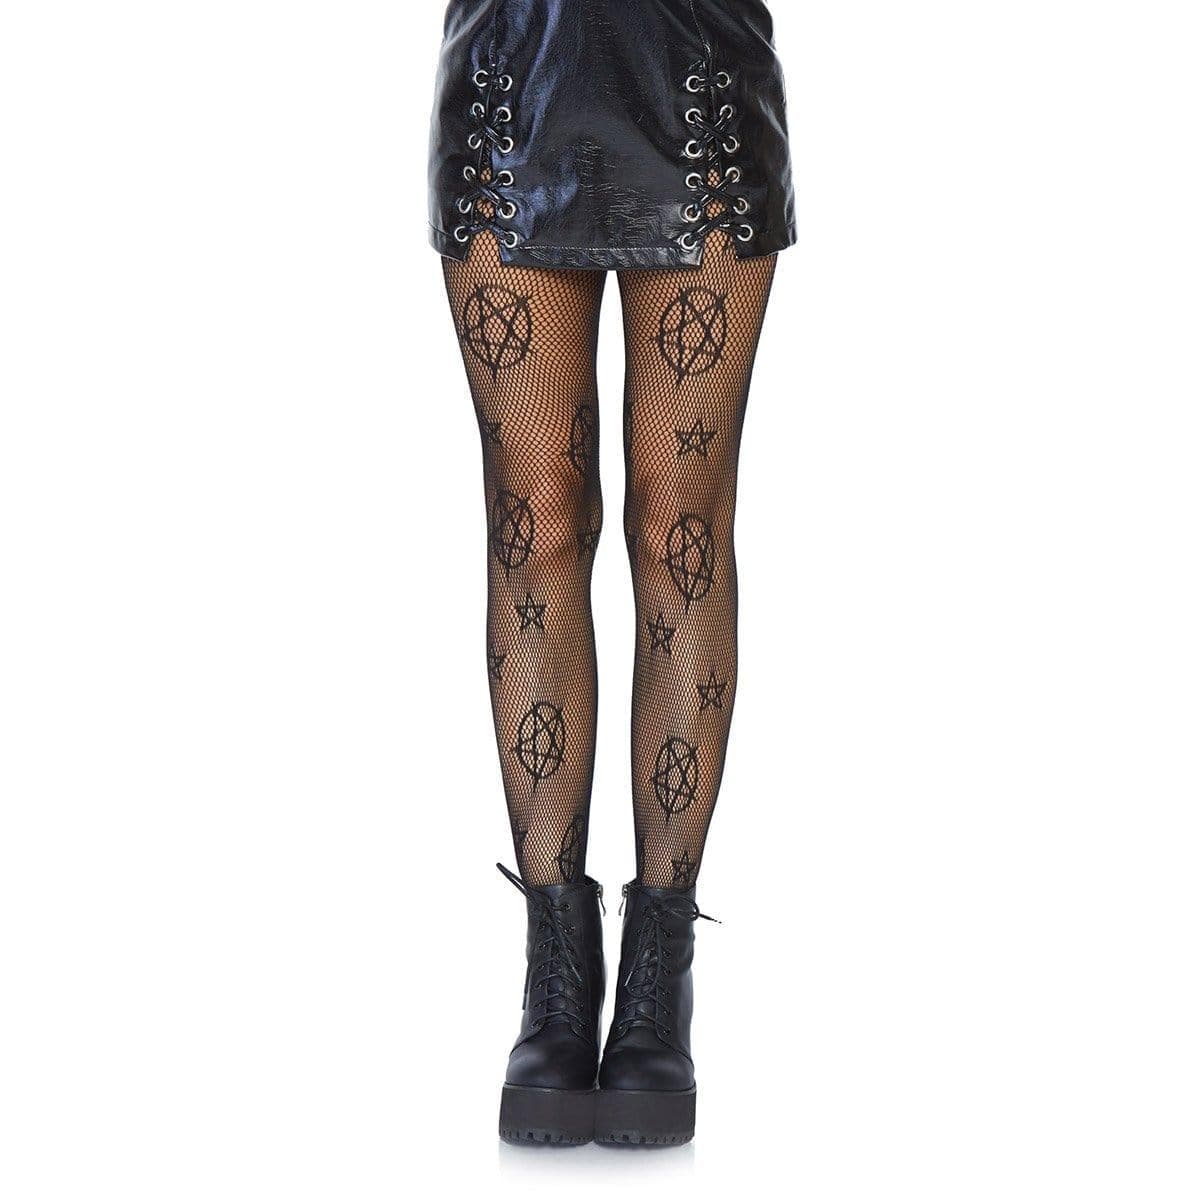 Buy Costume Accessories Black occult net tights for women sold at Party Expert